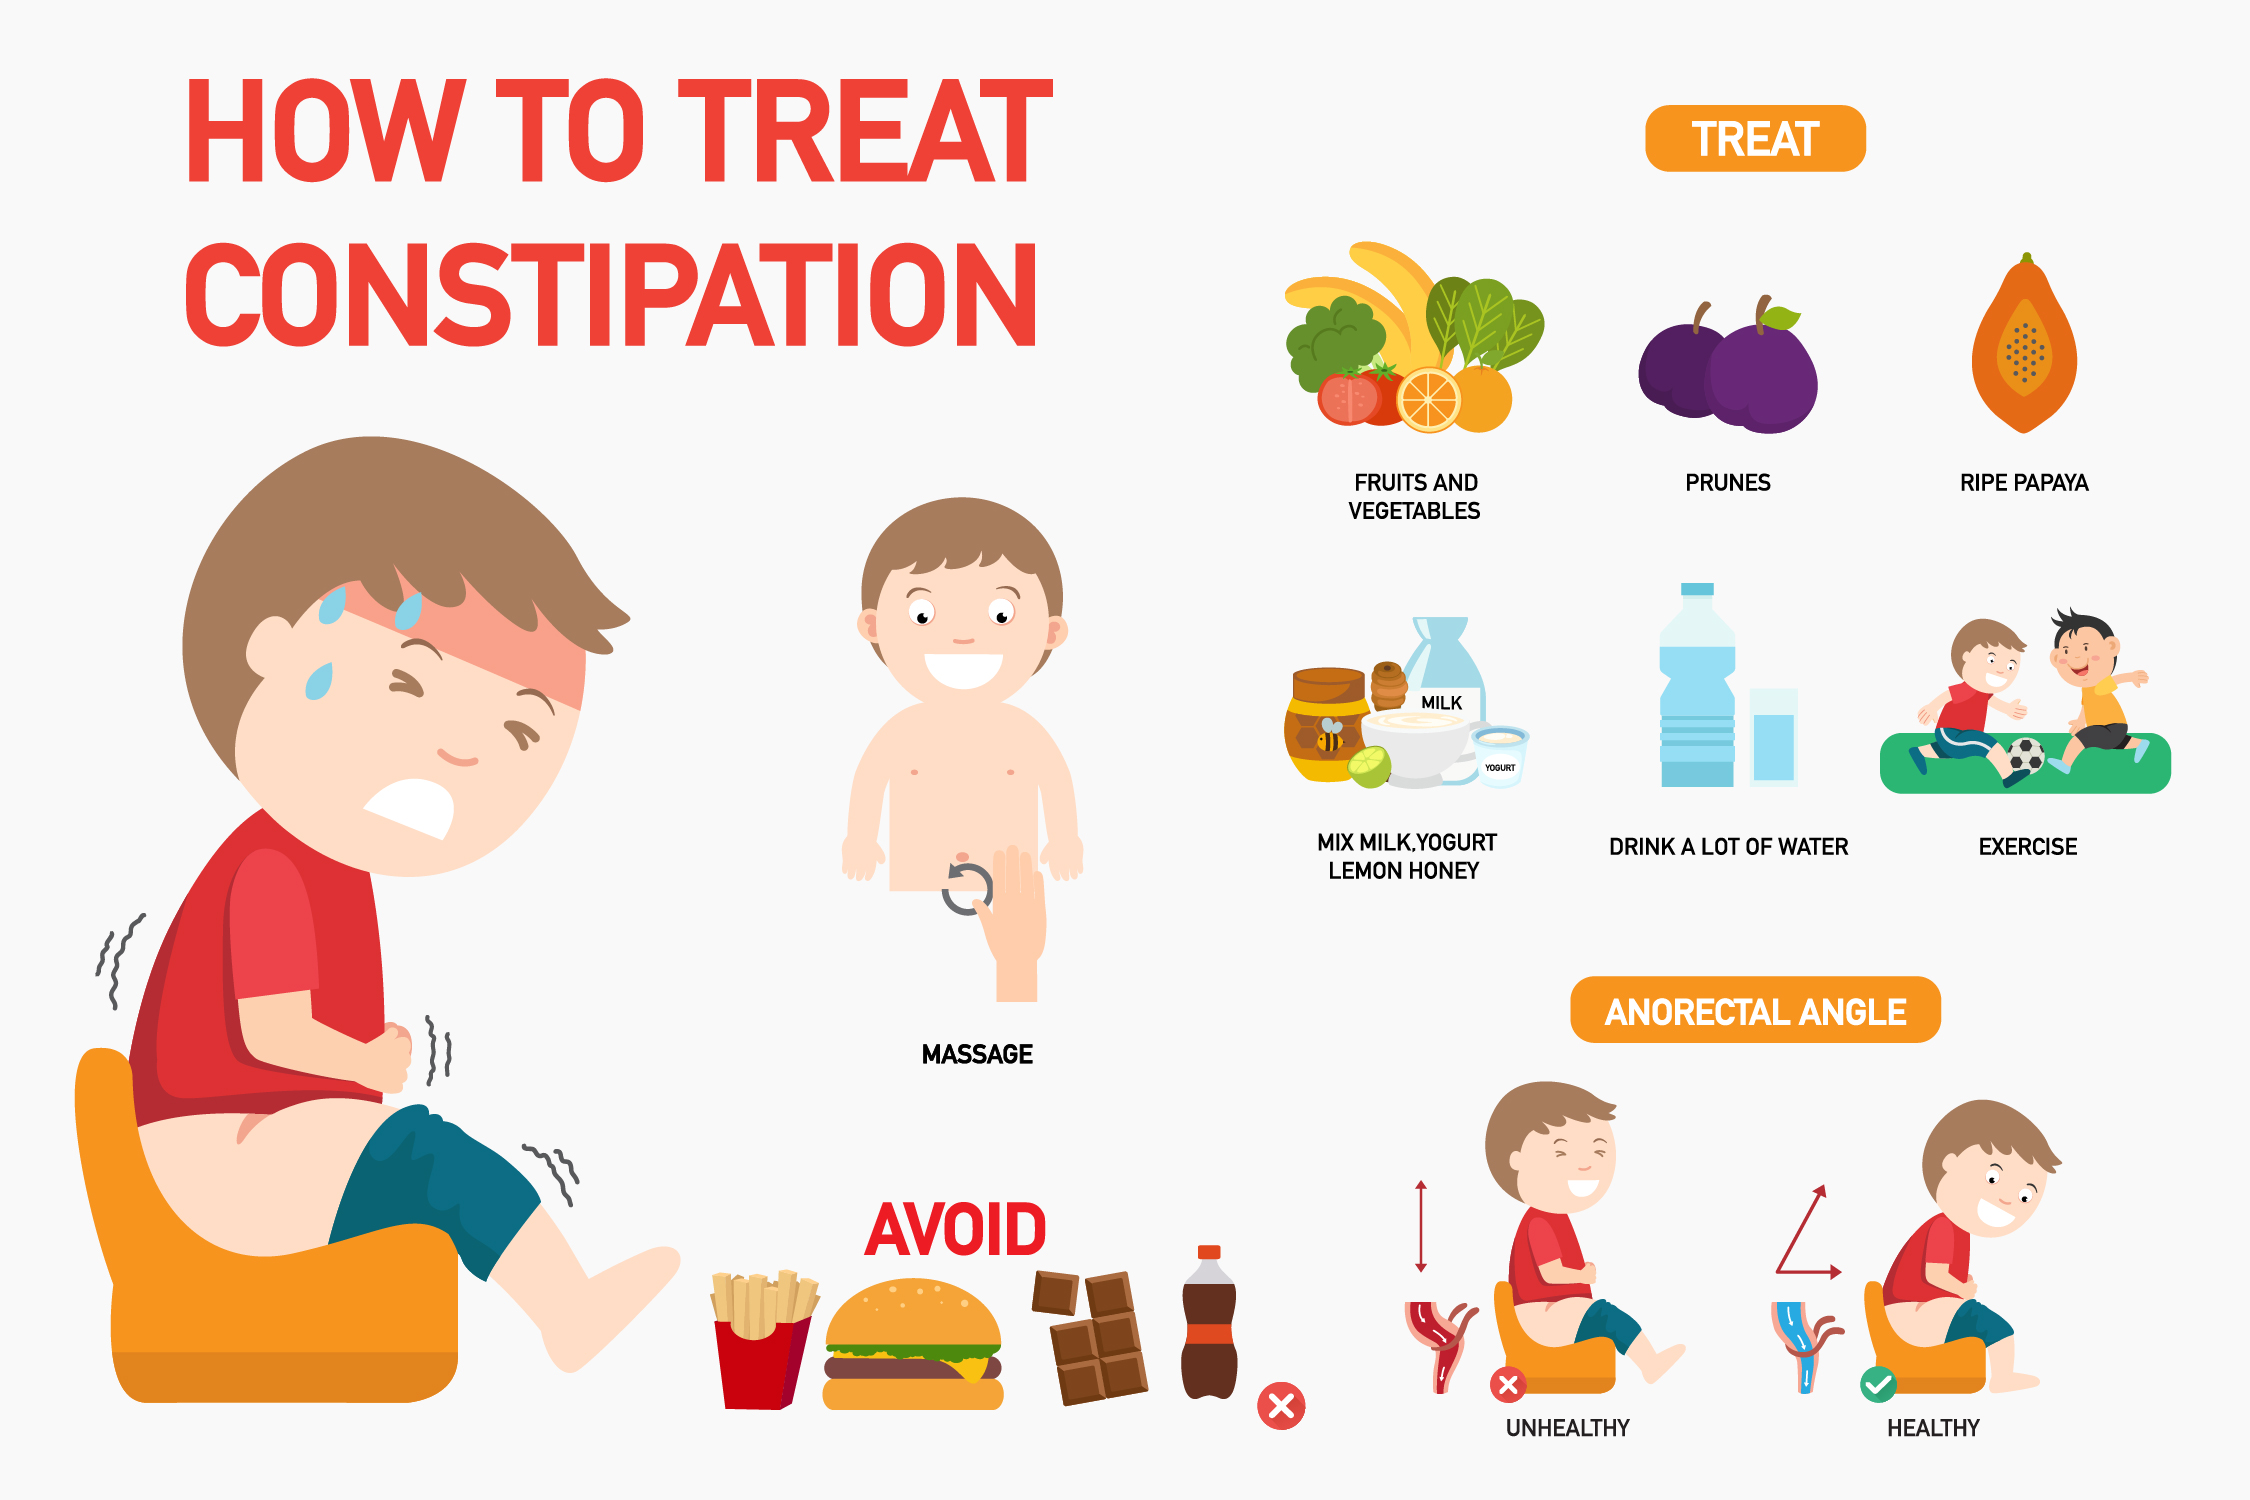 How can a person manage and prevent travel constipation?